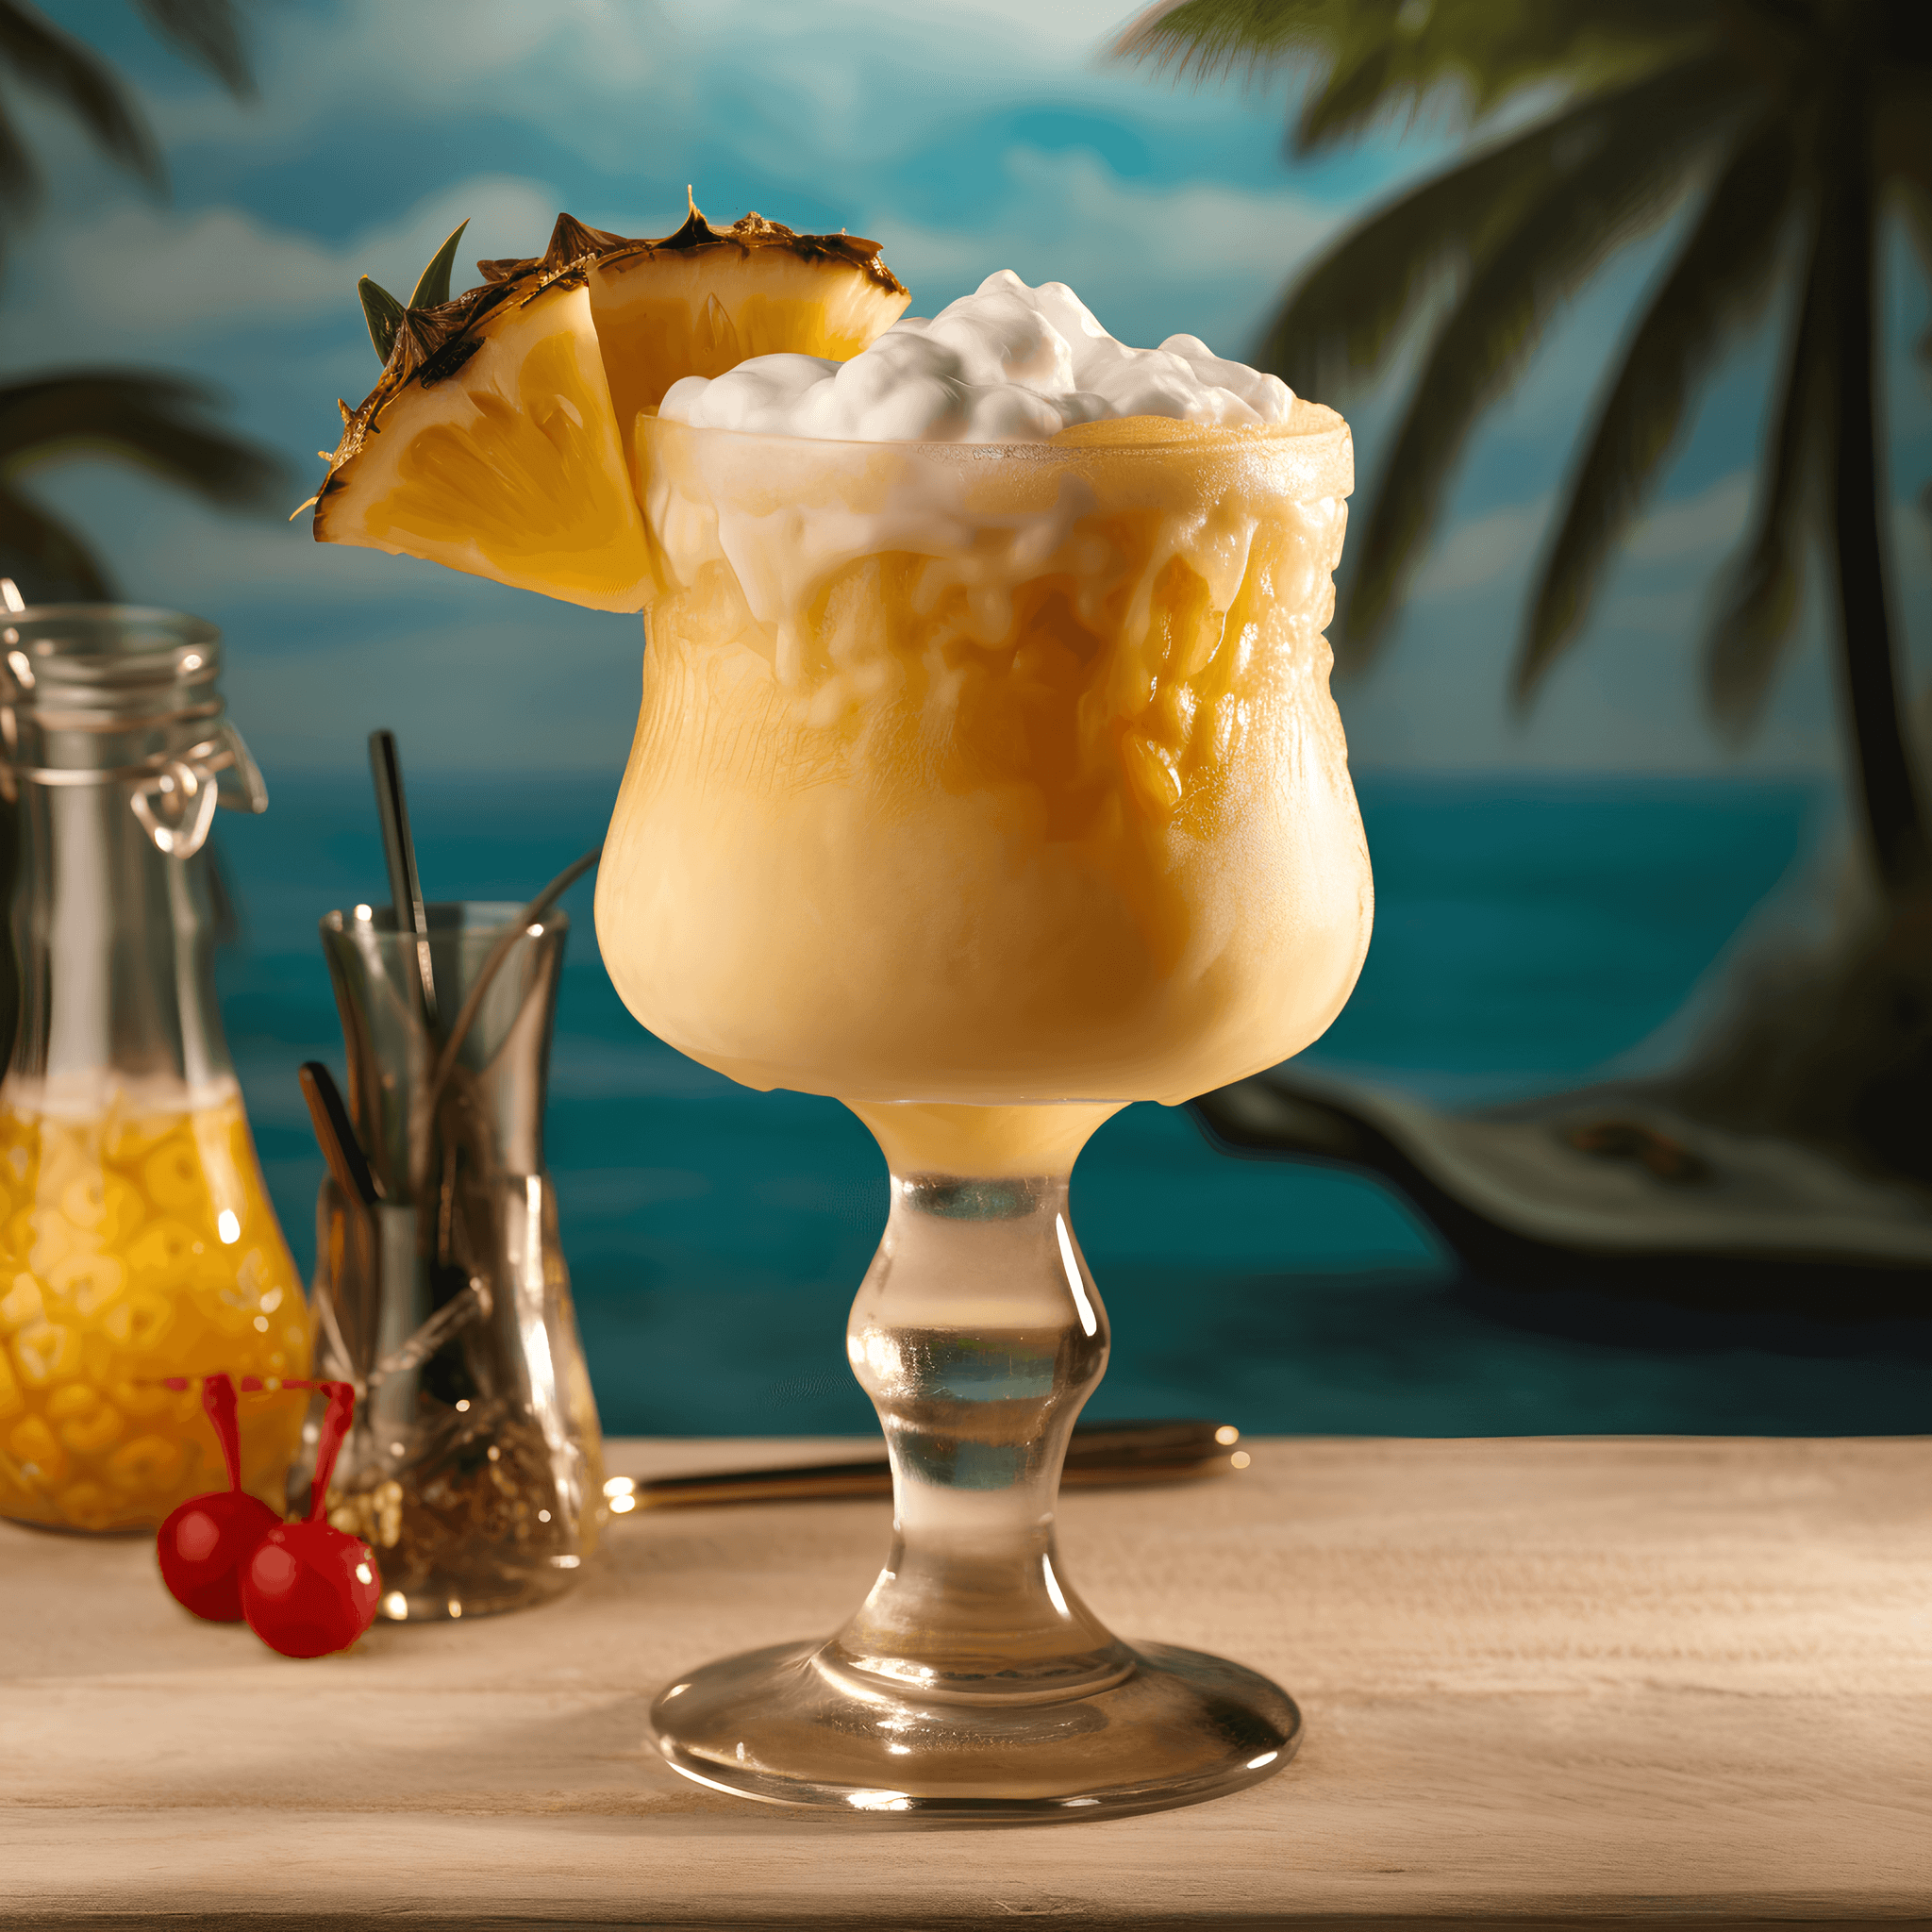 The Piña Colada is a sweet, creamy, and fruity cocktail with a smooth texture. The flavors of pineapple and coconut blend harmoniously, creating a tropical taste sensation. The rum adds a subtle warmth and depth to the drink.